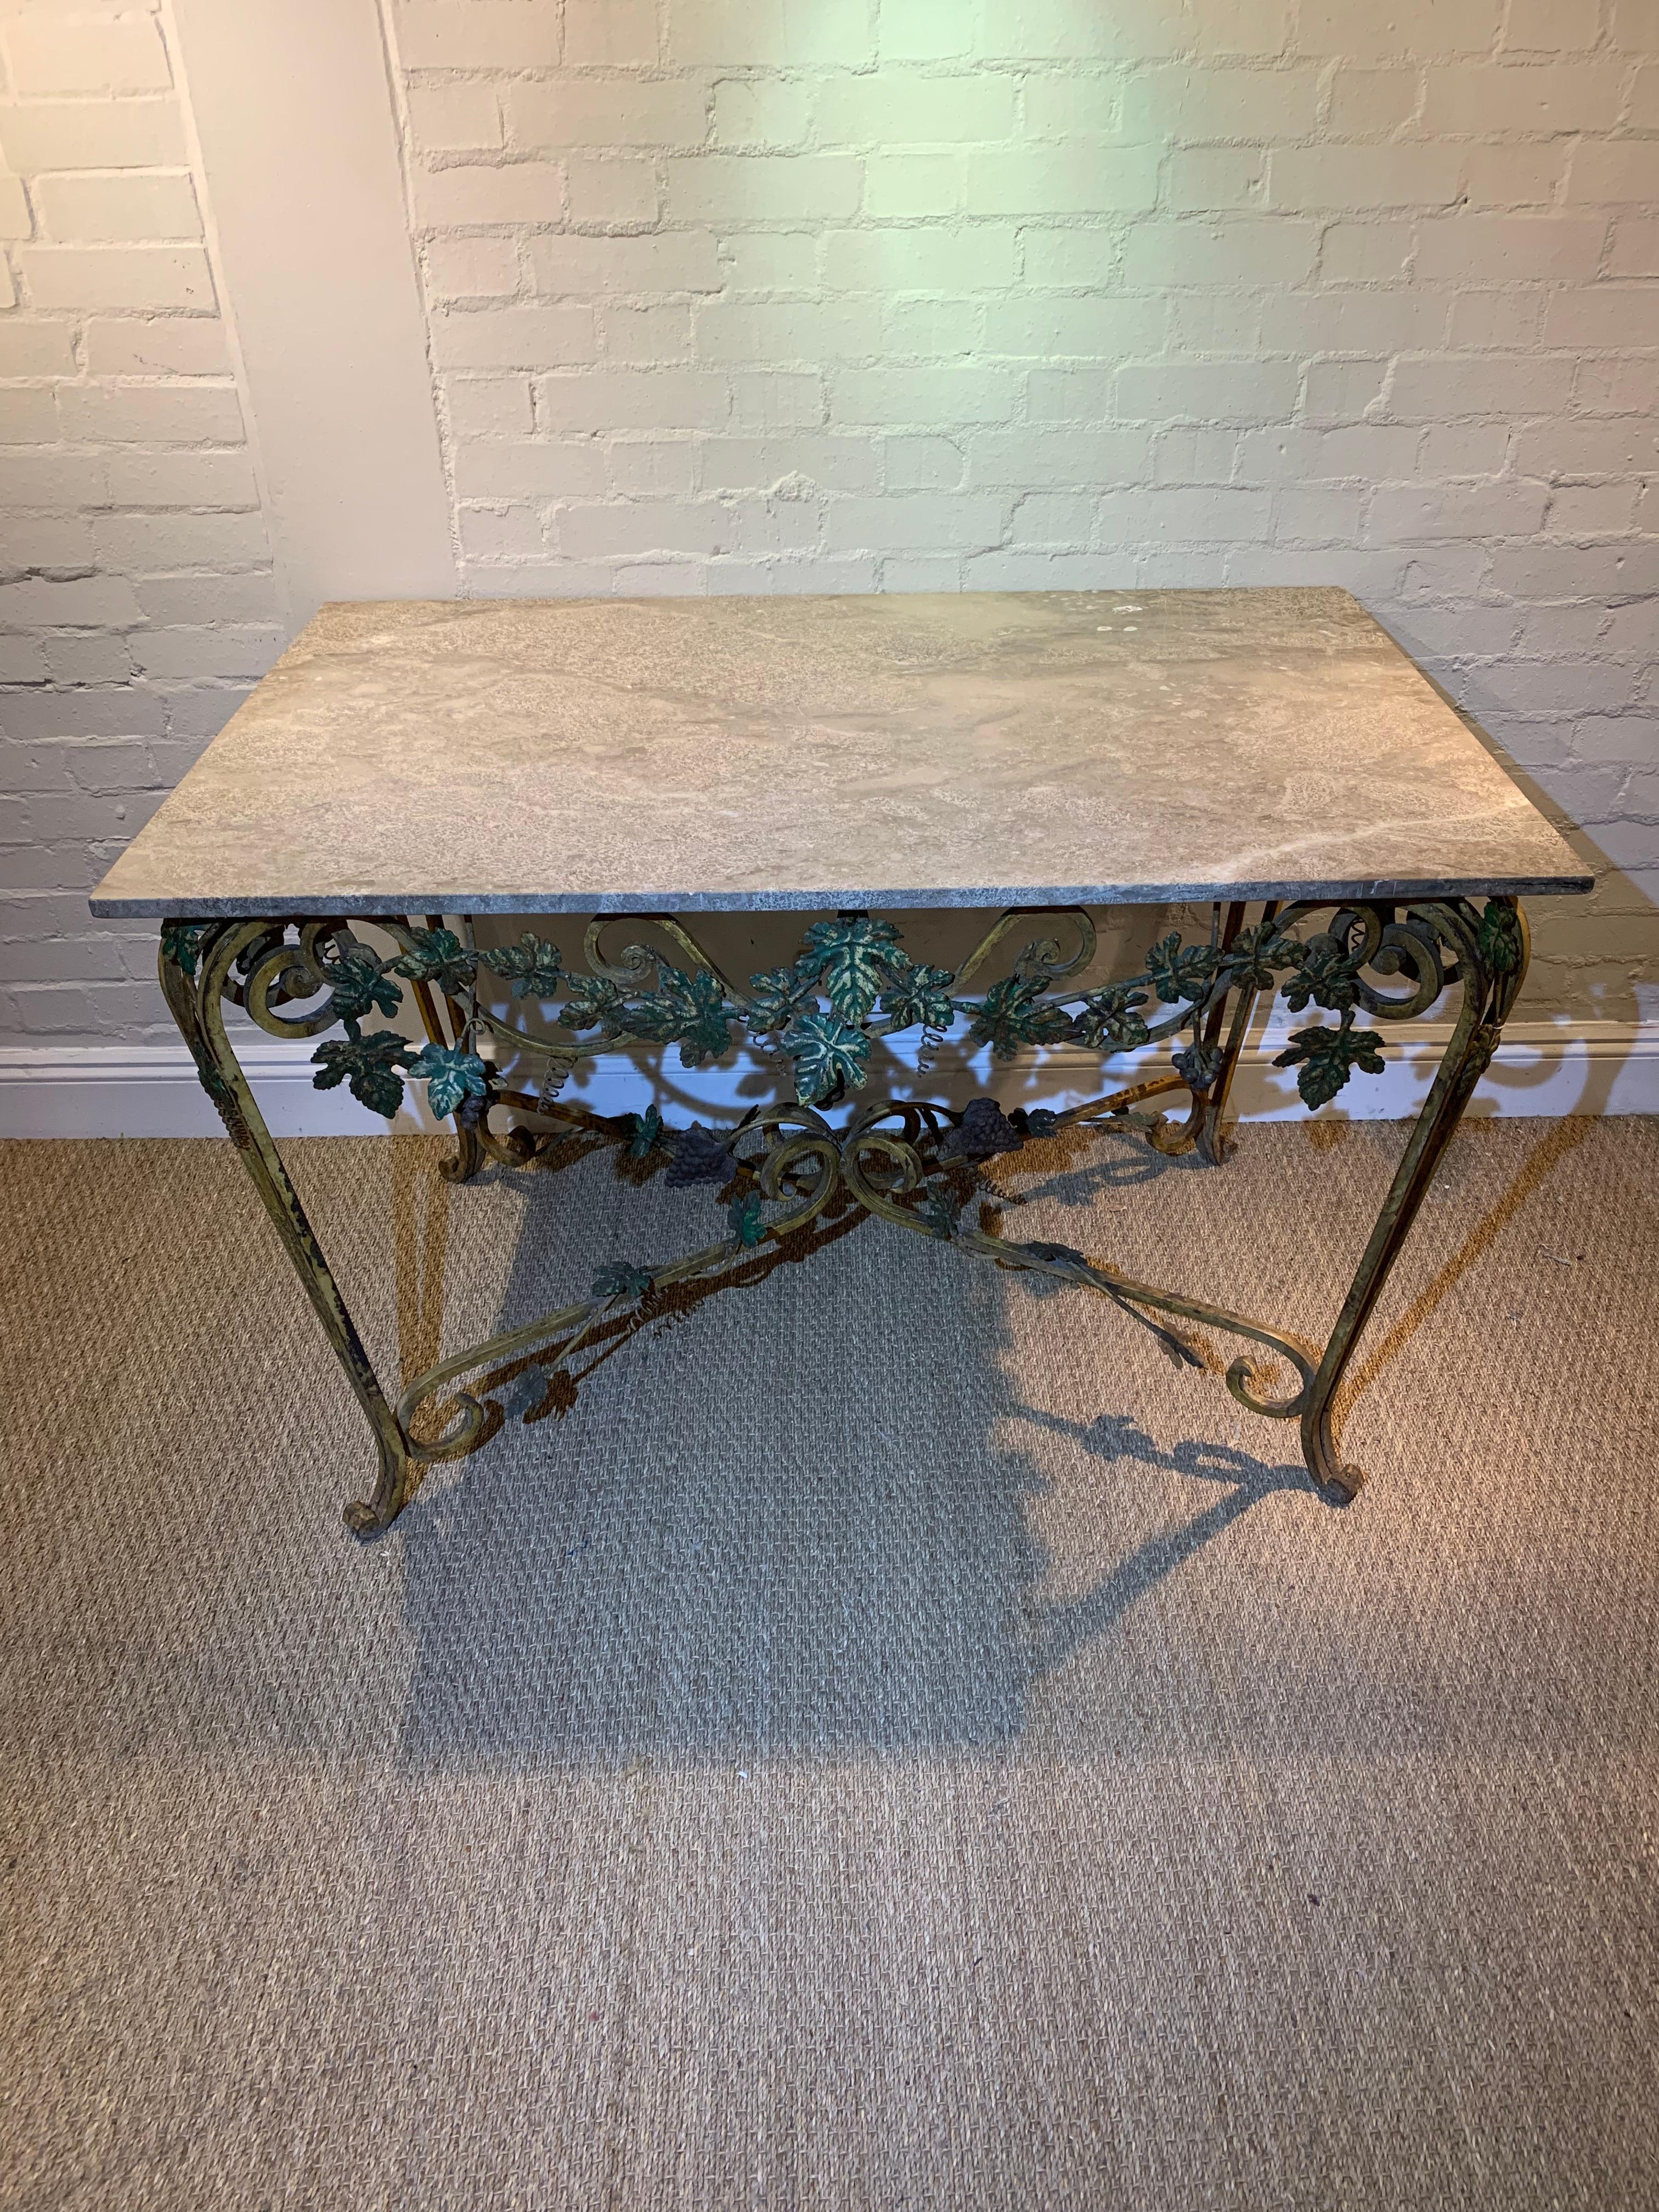 Midcentury 1950s painted and gilded French rectangular wrought iron console table featuring scroledl legs, decorative trailing leaves across the front and also in the centre.
The marble which has likely to have been replaced is a neutral pale beige